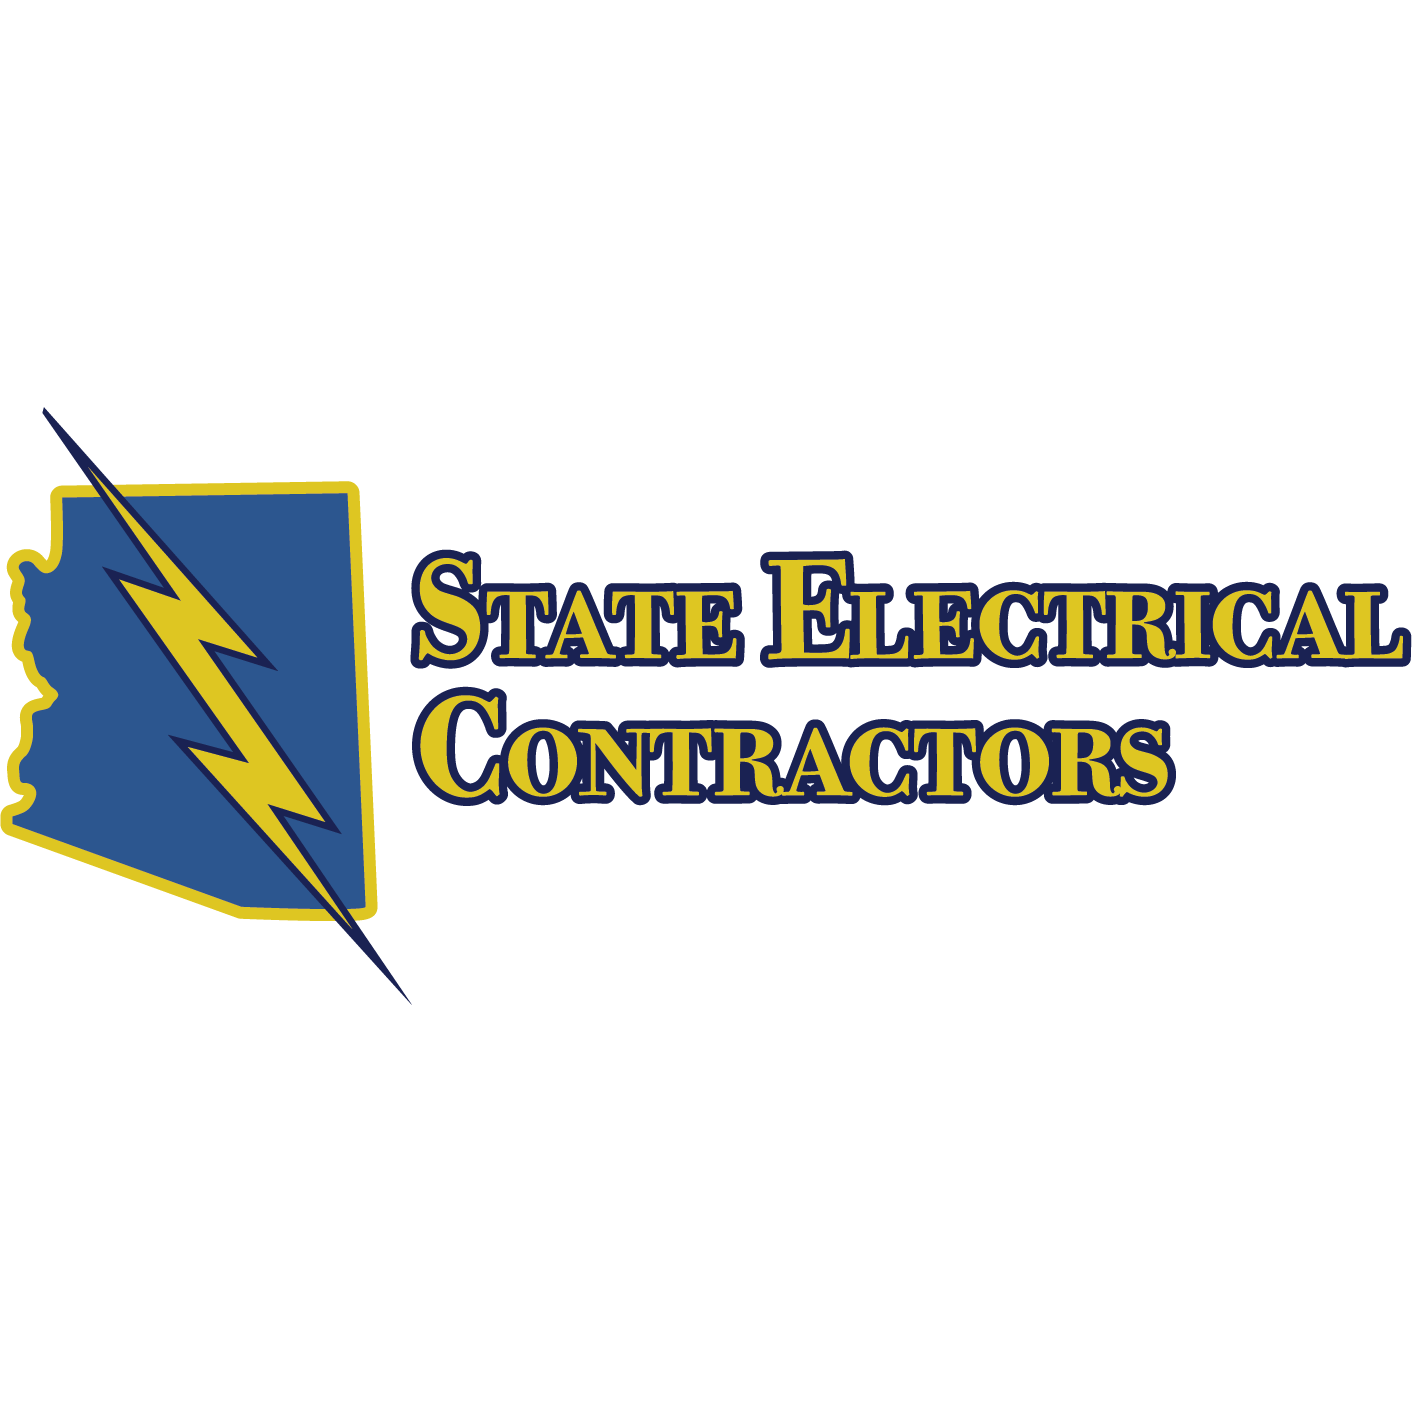 State Electrical Contractors, Inc